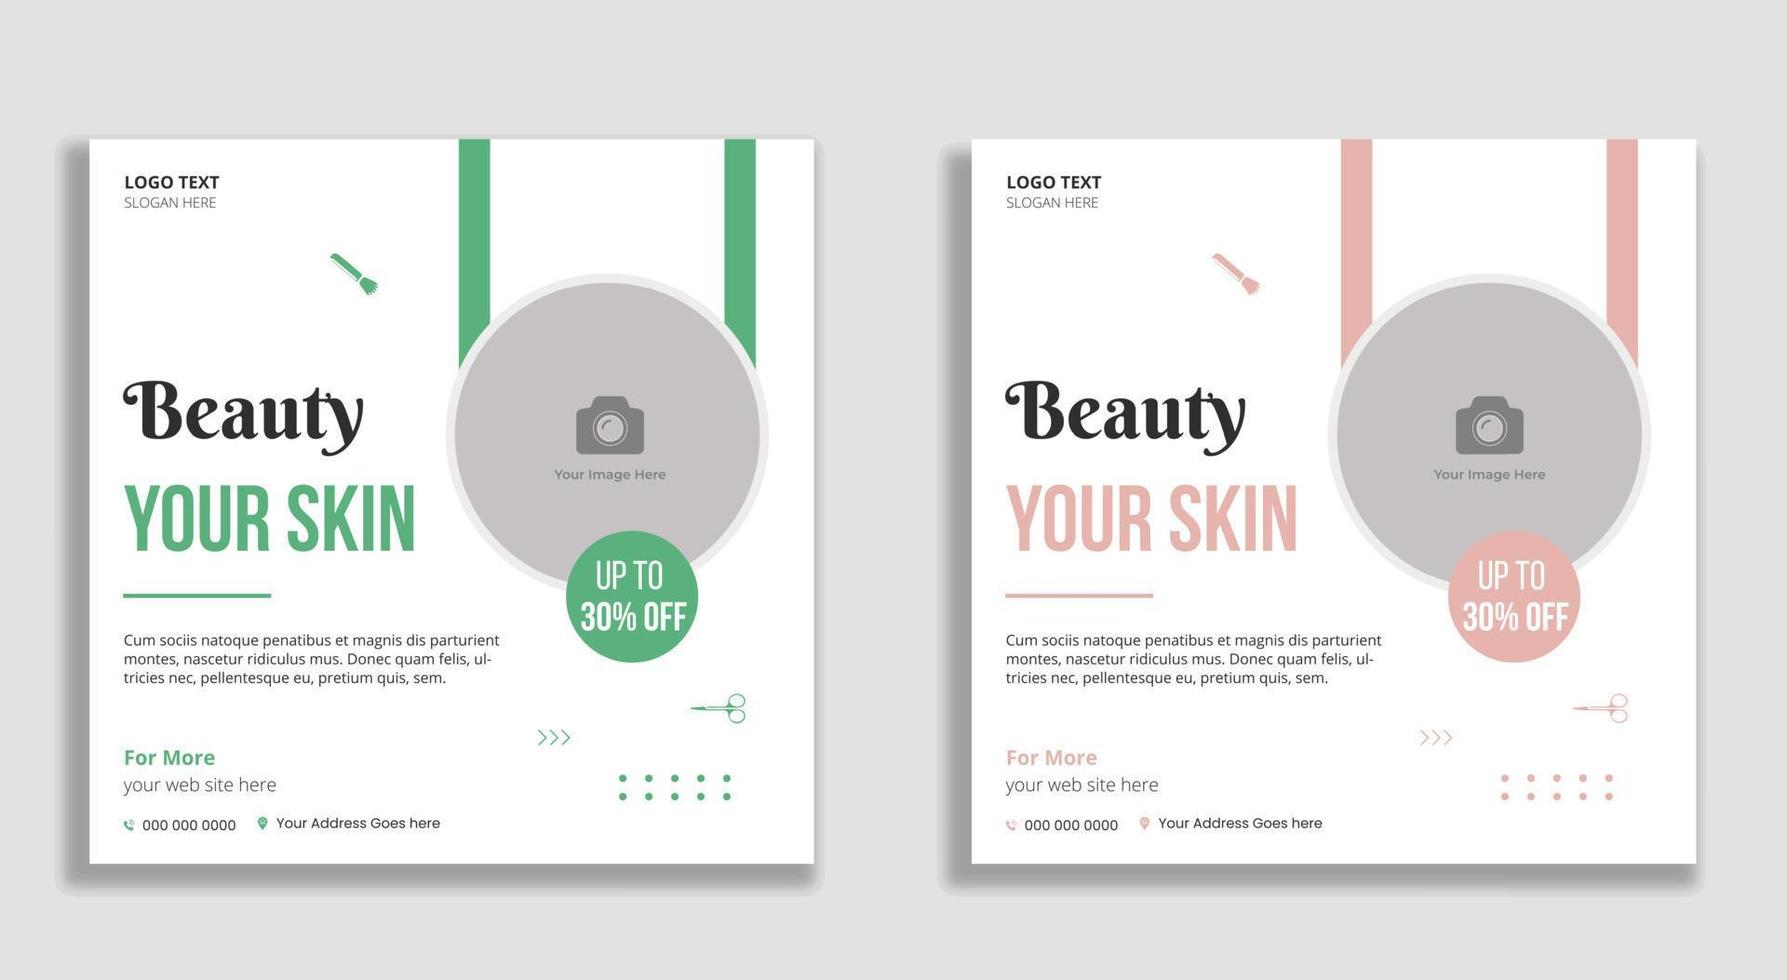 Beauty your skin salon and spa social media and web banner vector